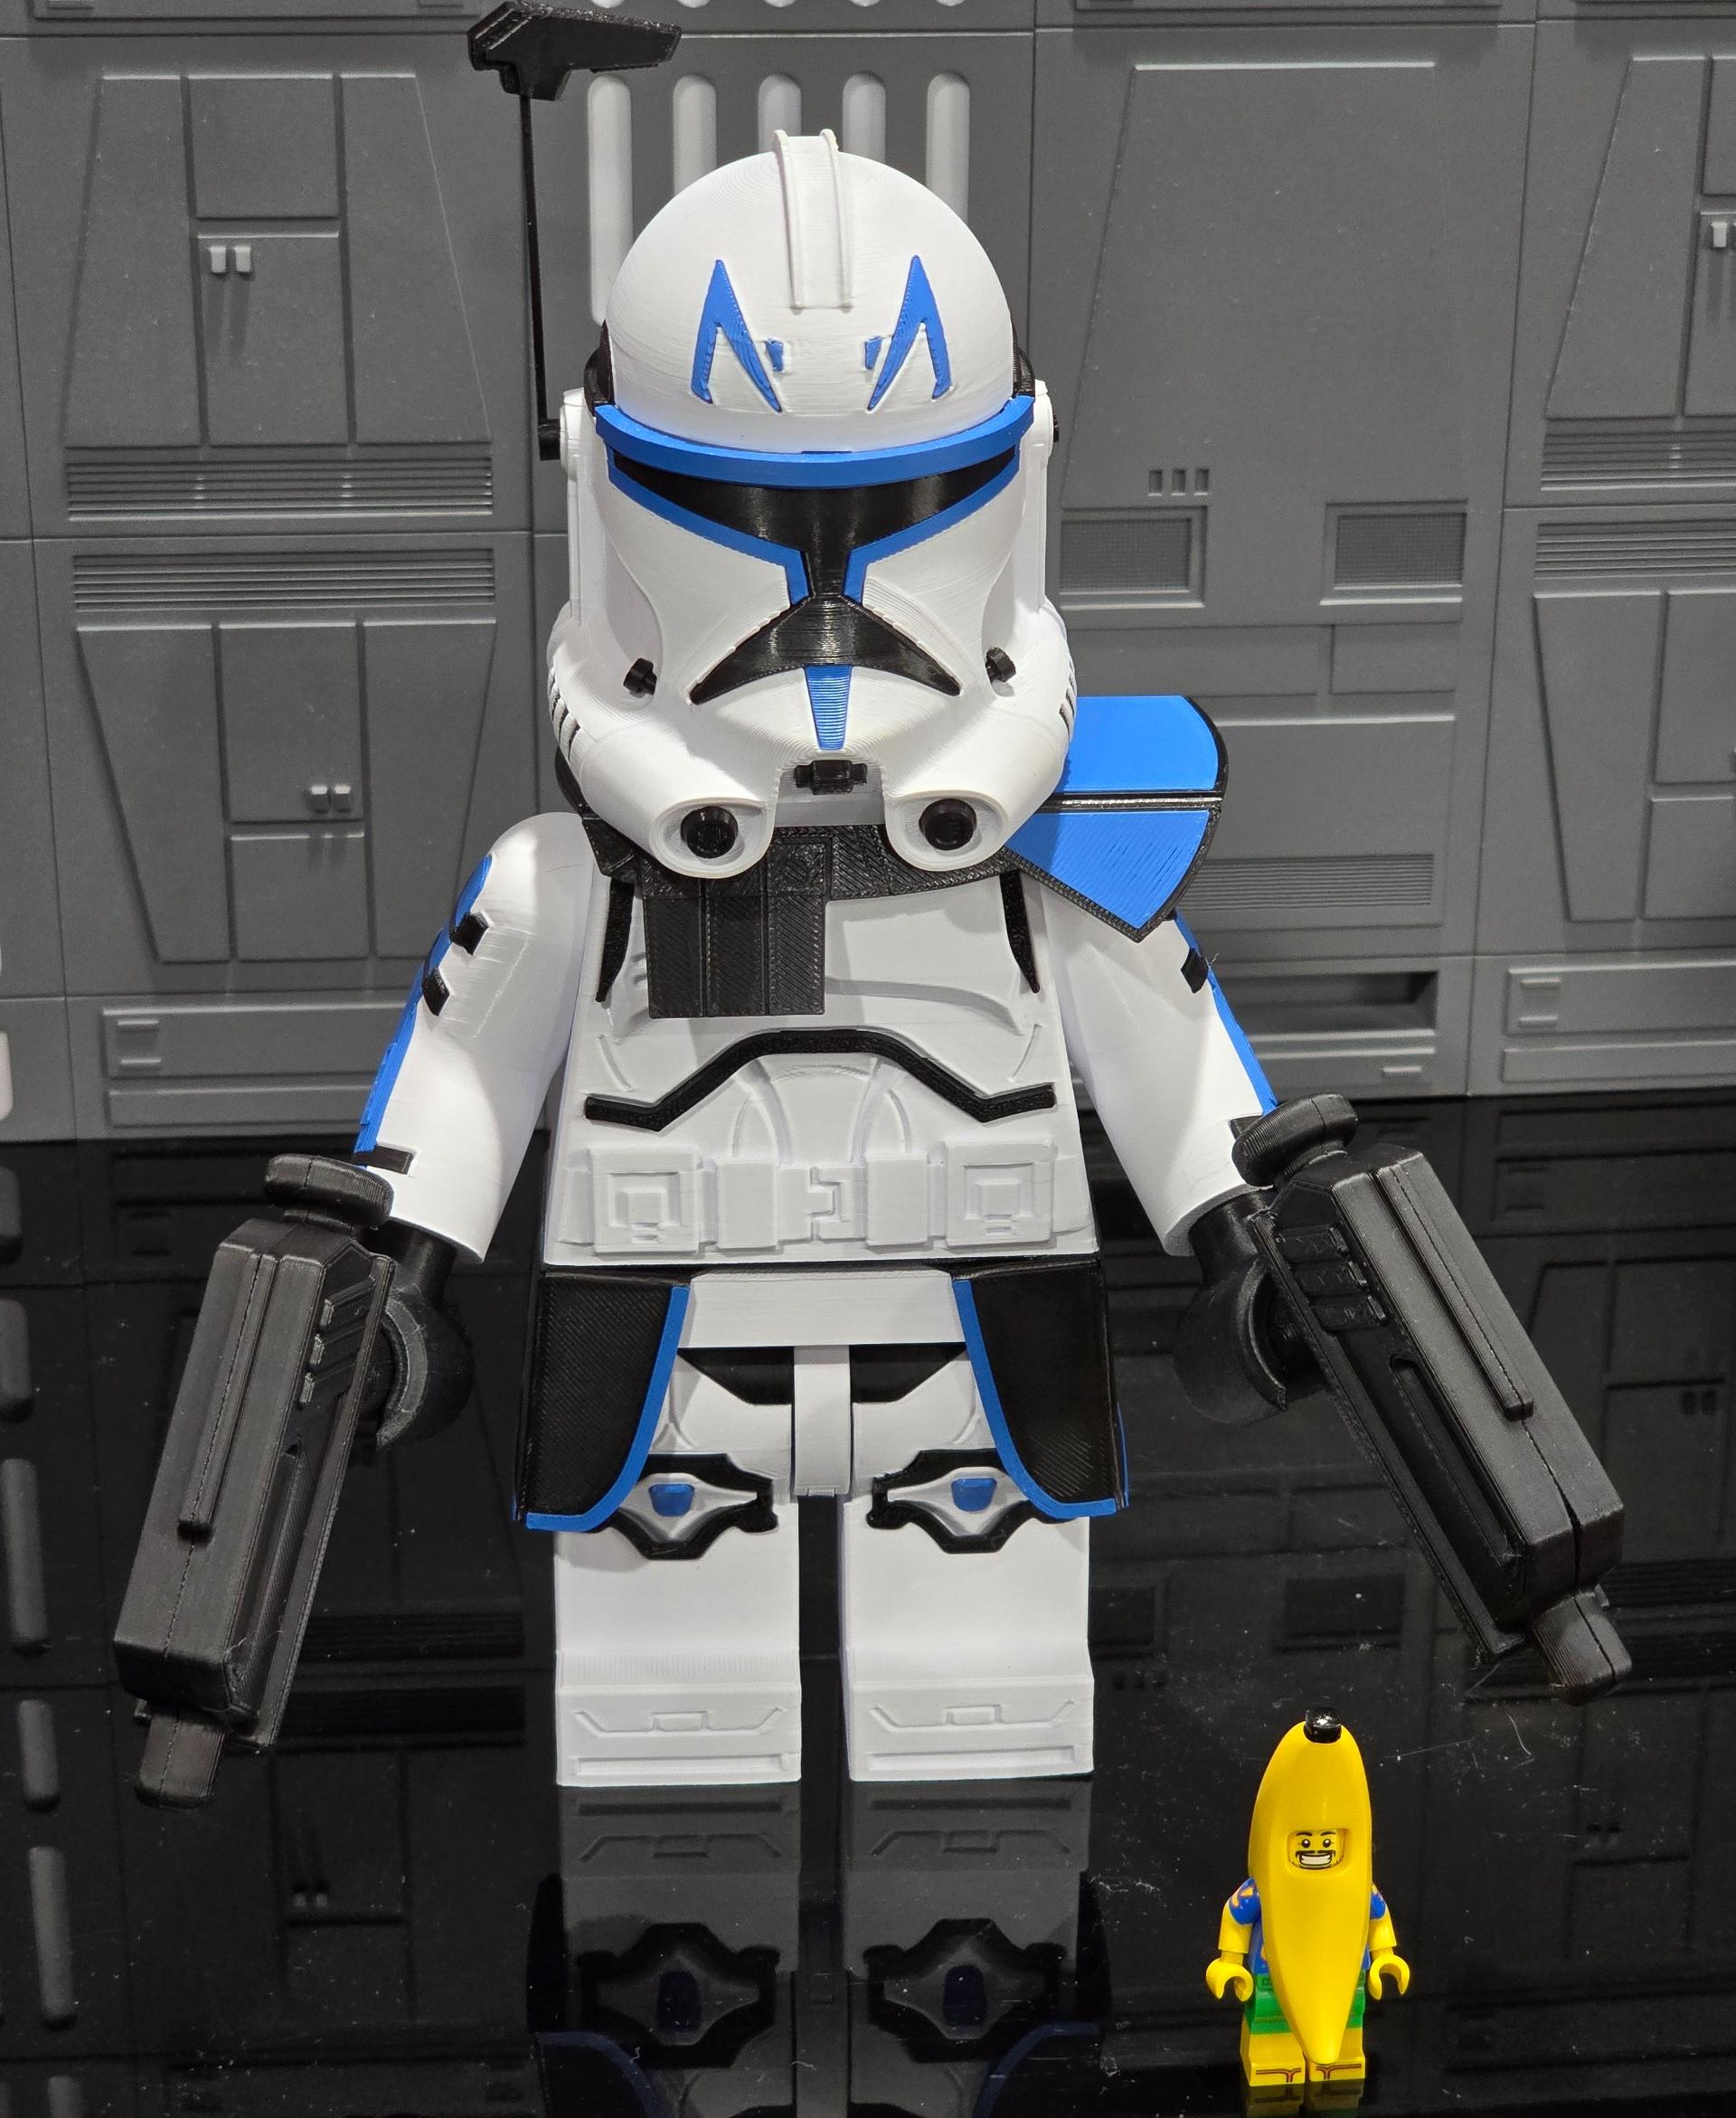 Captain Rex (6:1 LEGO-inspired brick figure, NO MMU/AMS, NO supports, NO glue) - "Yes, I know both Crunch and Kirk. All the captains know each other, but not all are Star Wars LEGO captains."  - 3d model